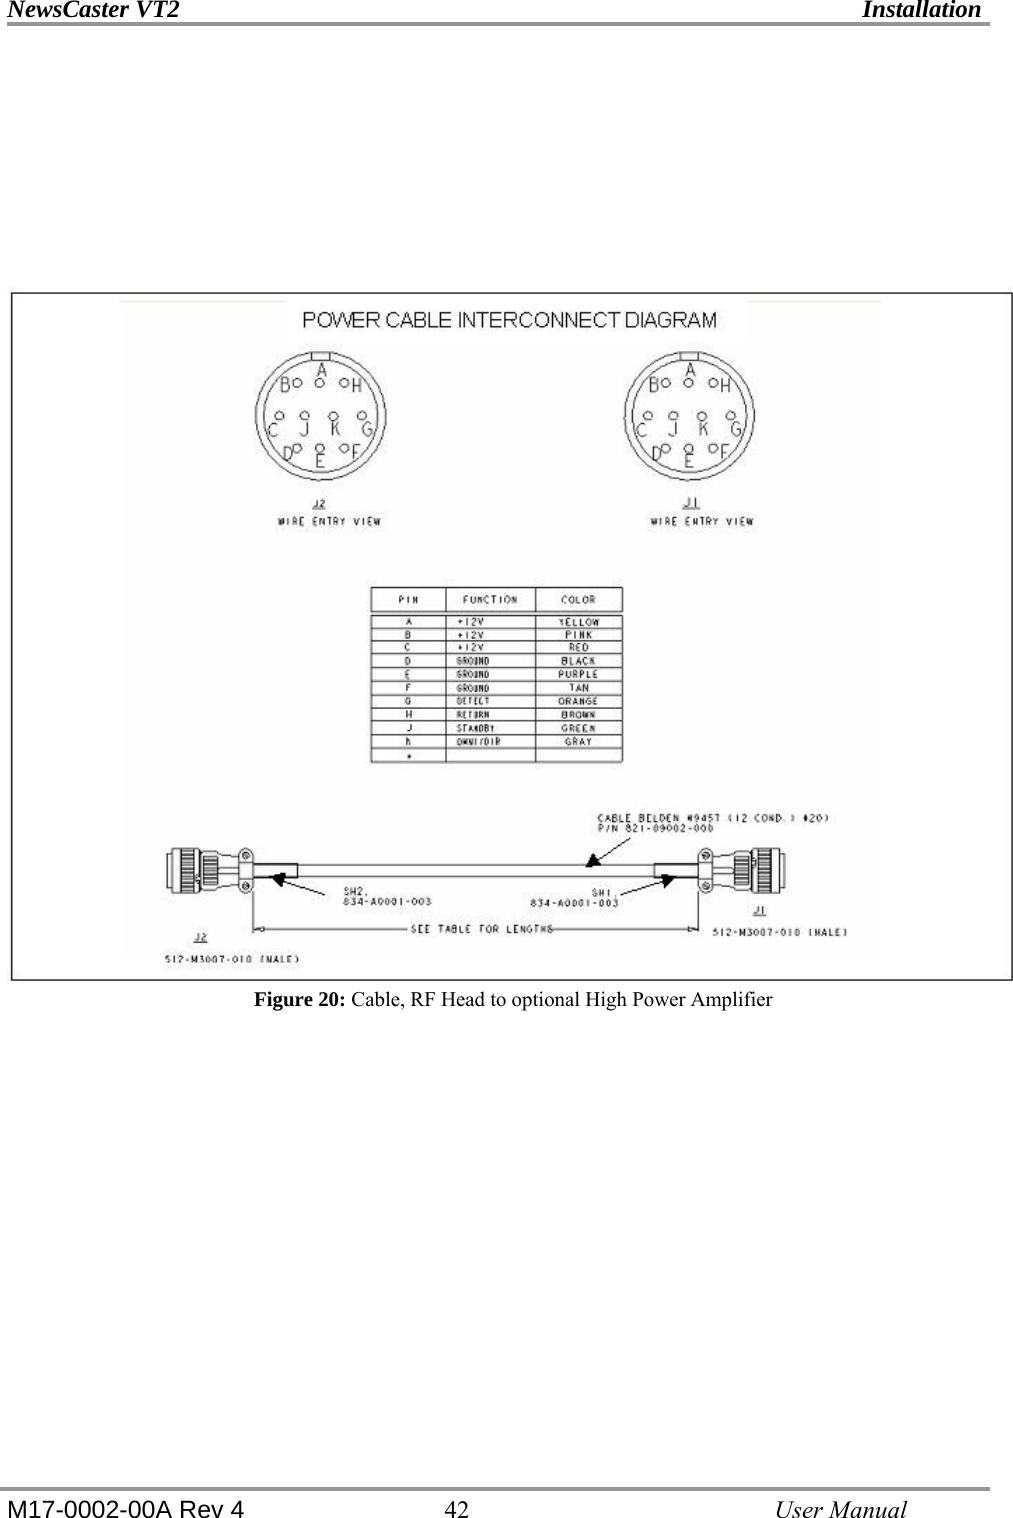 NewsCaster VT2    Installation  M17-0002-00A Rev 4 42   User Manual       Figure 20: Cable, RF Head to optional High Power Amplifier 